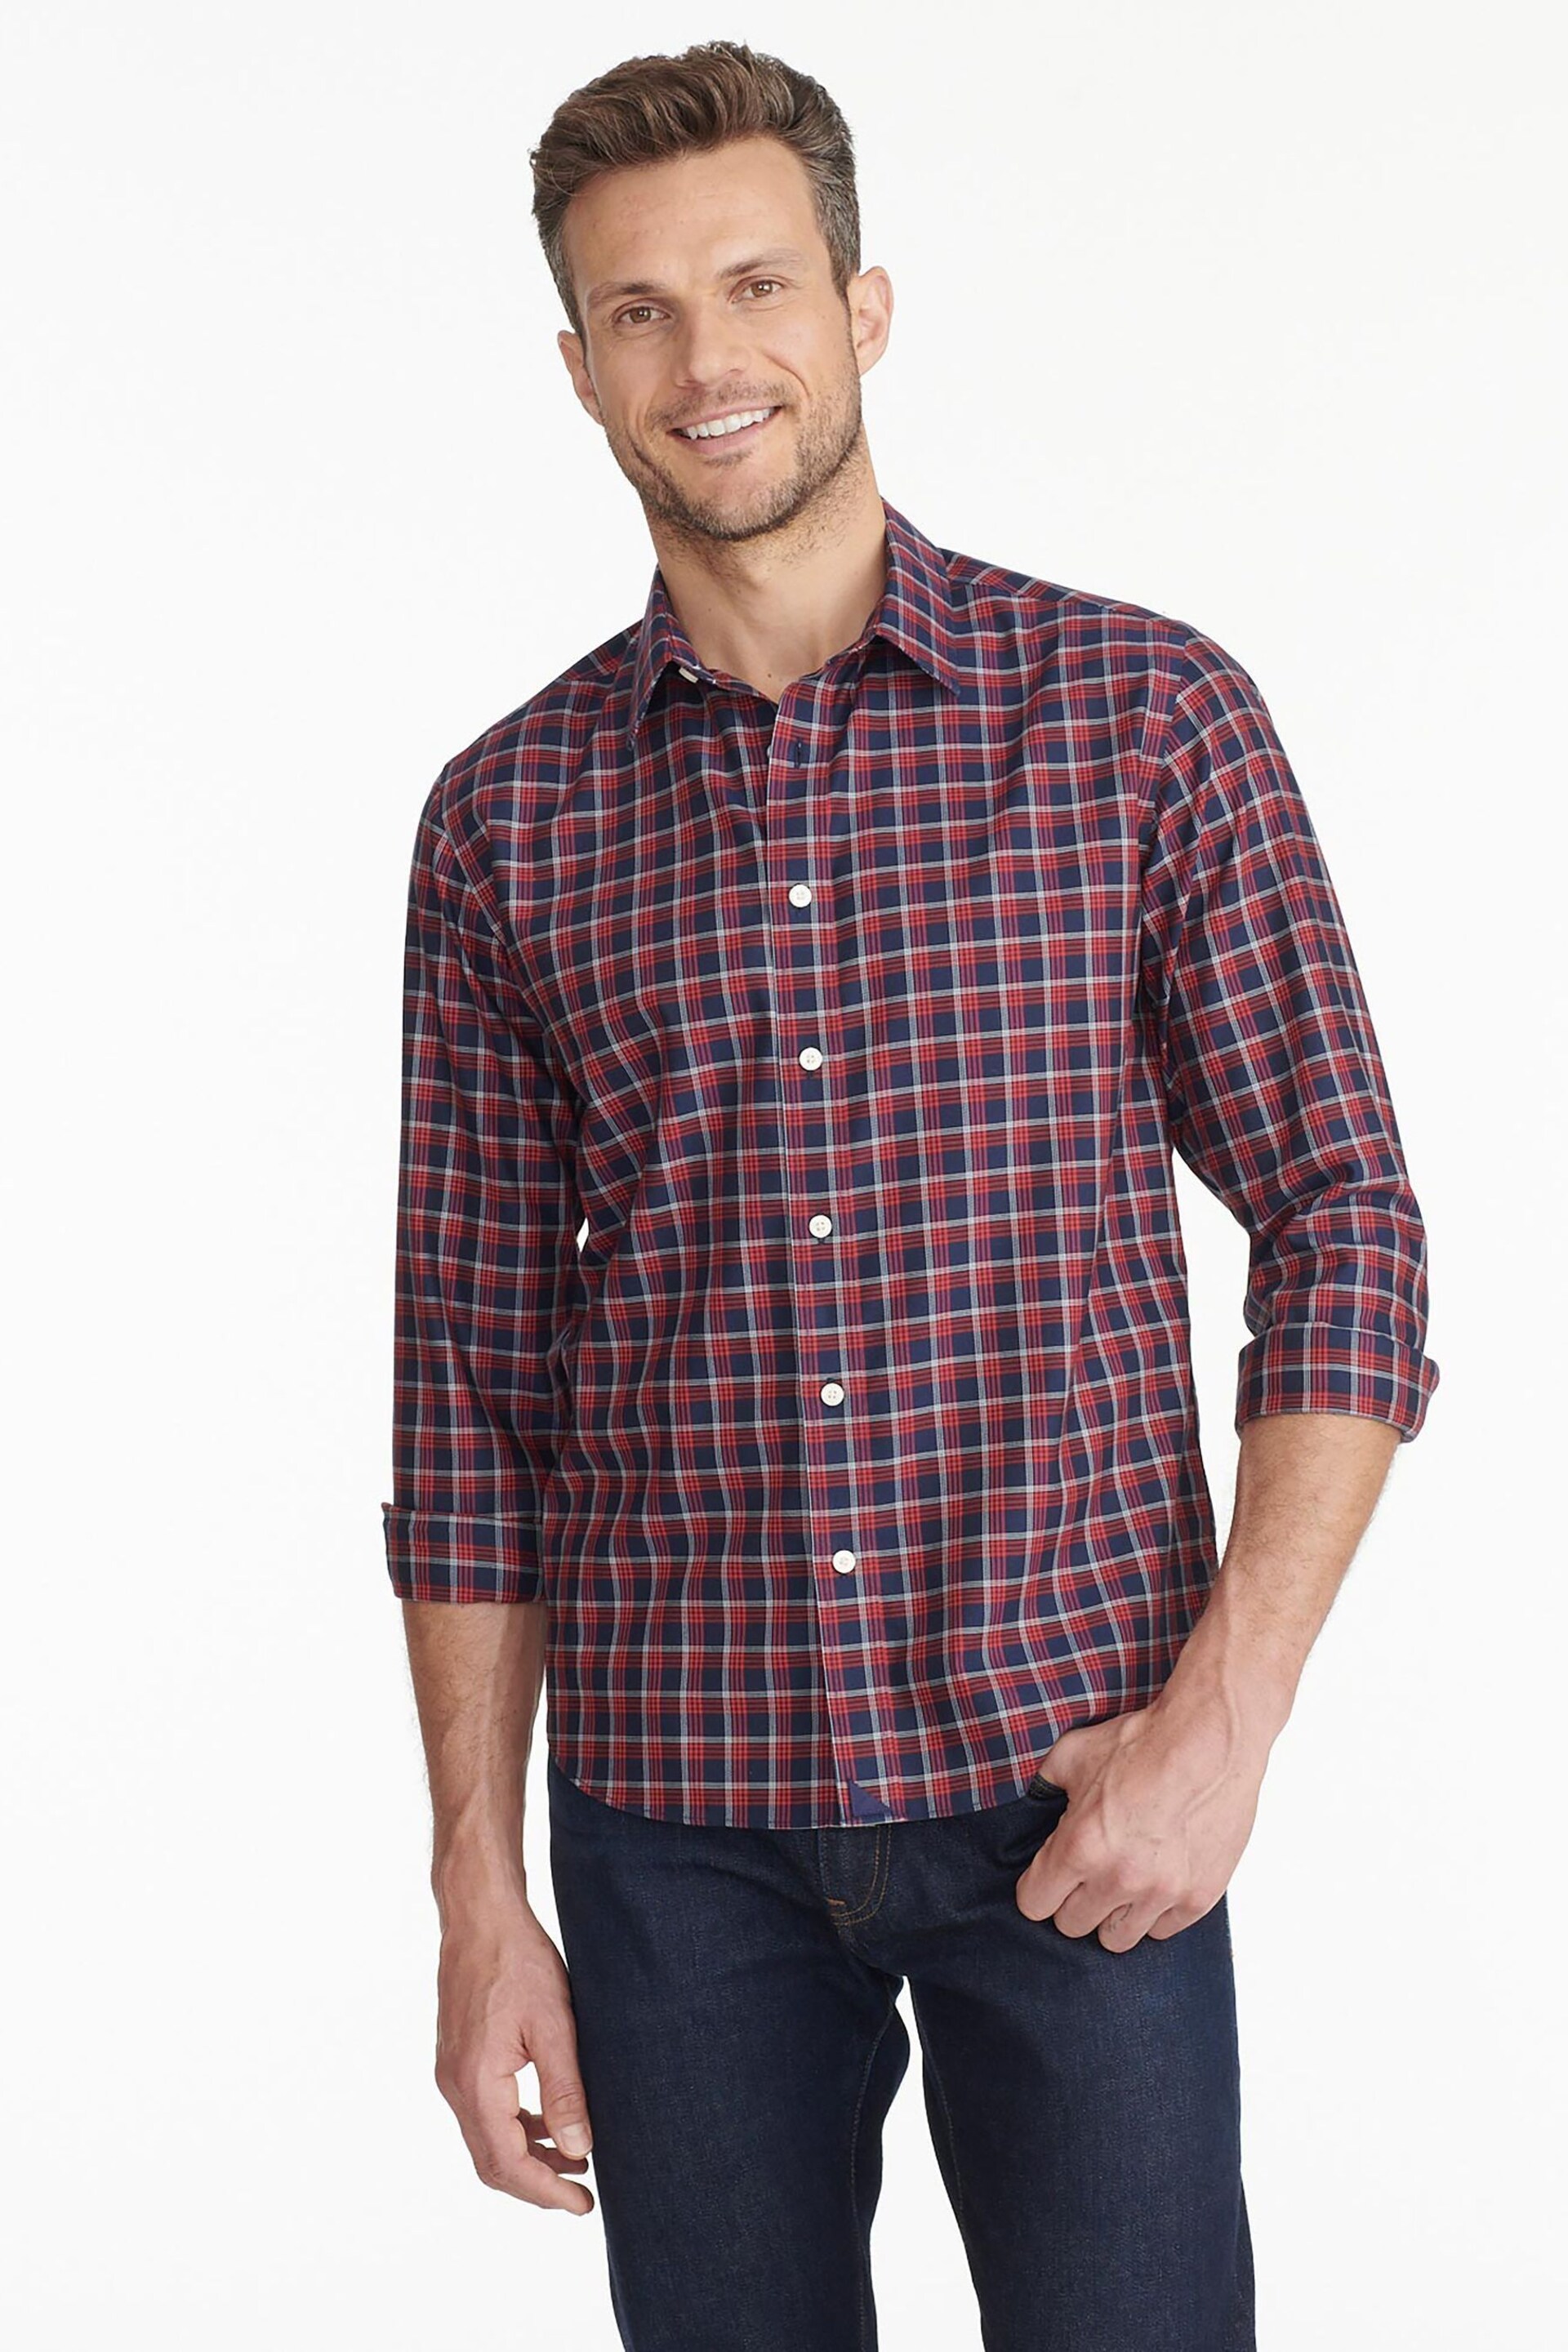 UNTUCKit Blue/Red Wrinkle-Free Slim Fit Cheny Shirt - Image 1 of 6